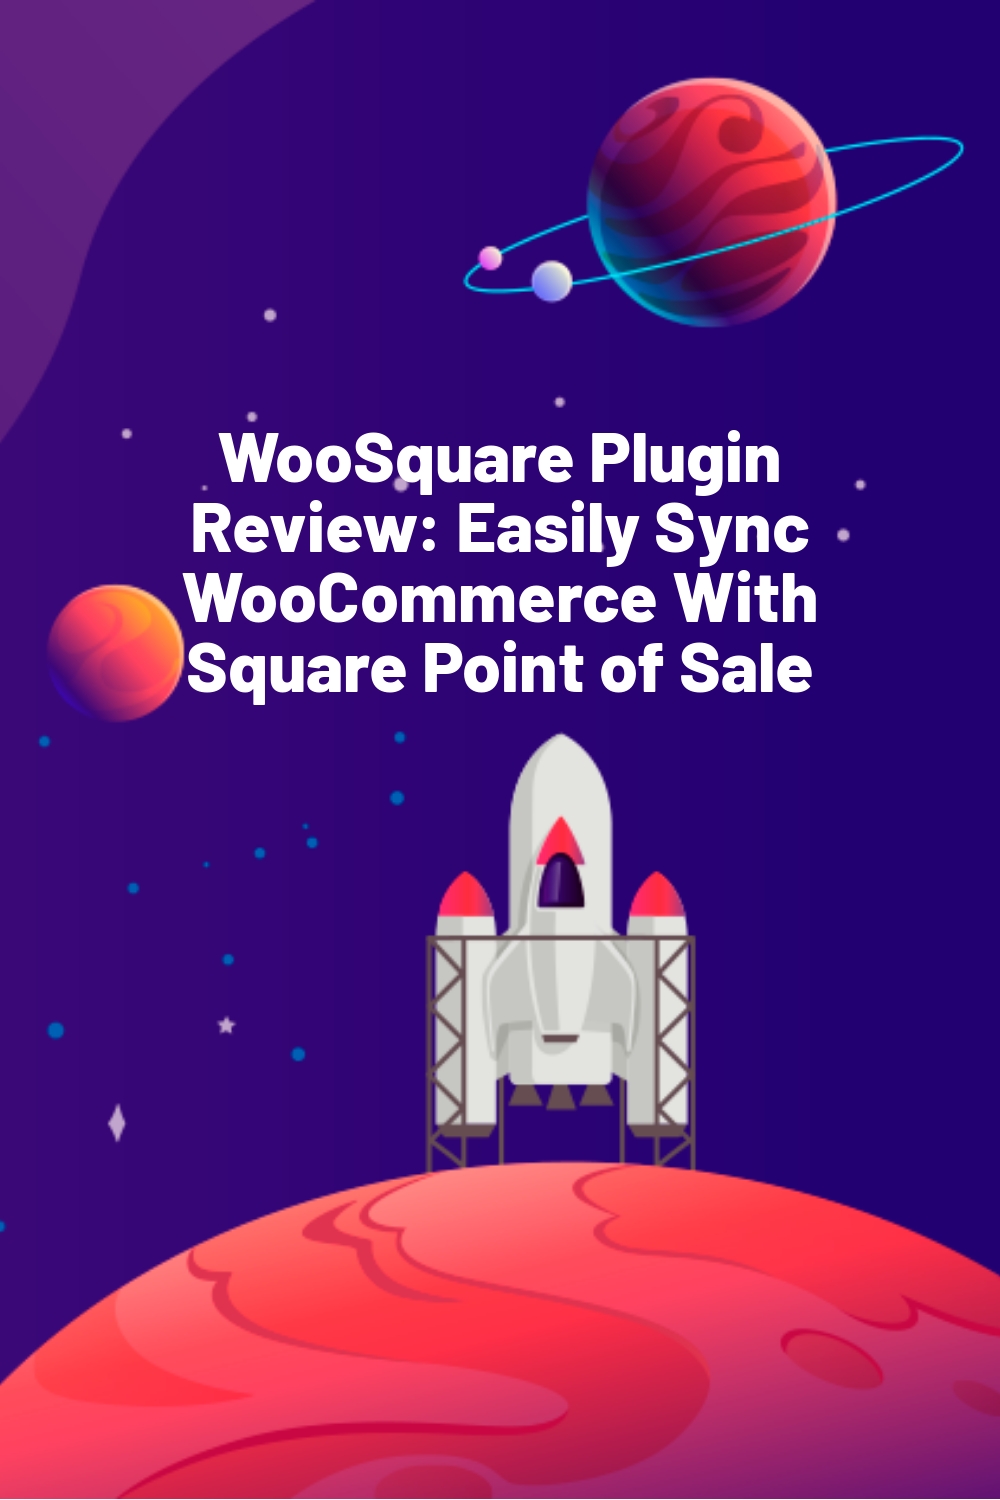 WooSquare Plugin Review: Easily Sync WooCommerce With Square Point of Sale